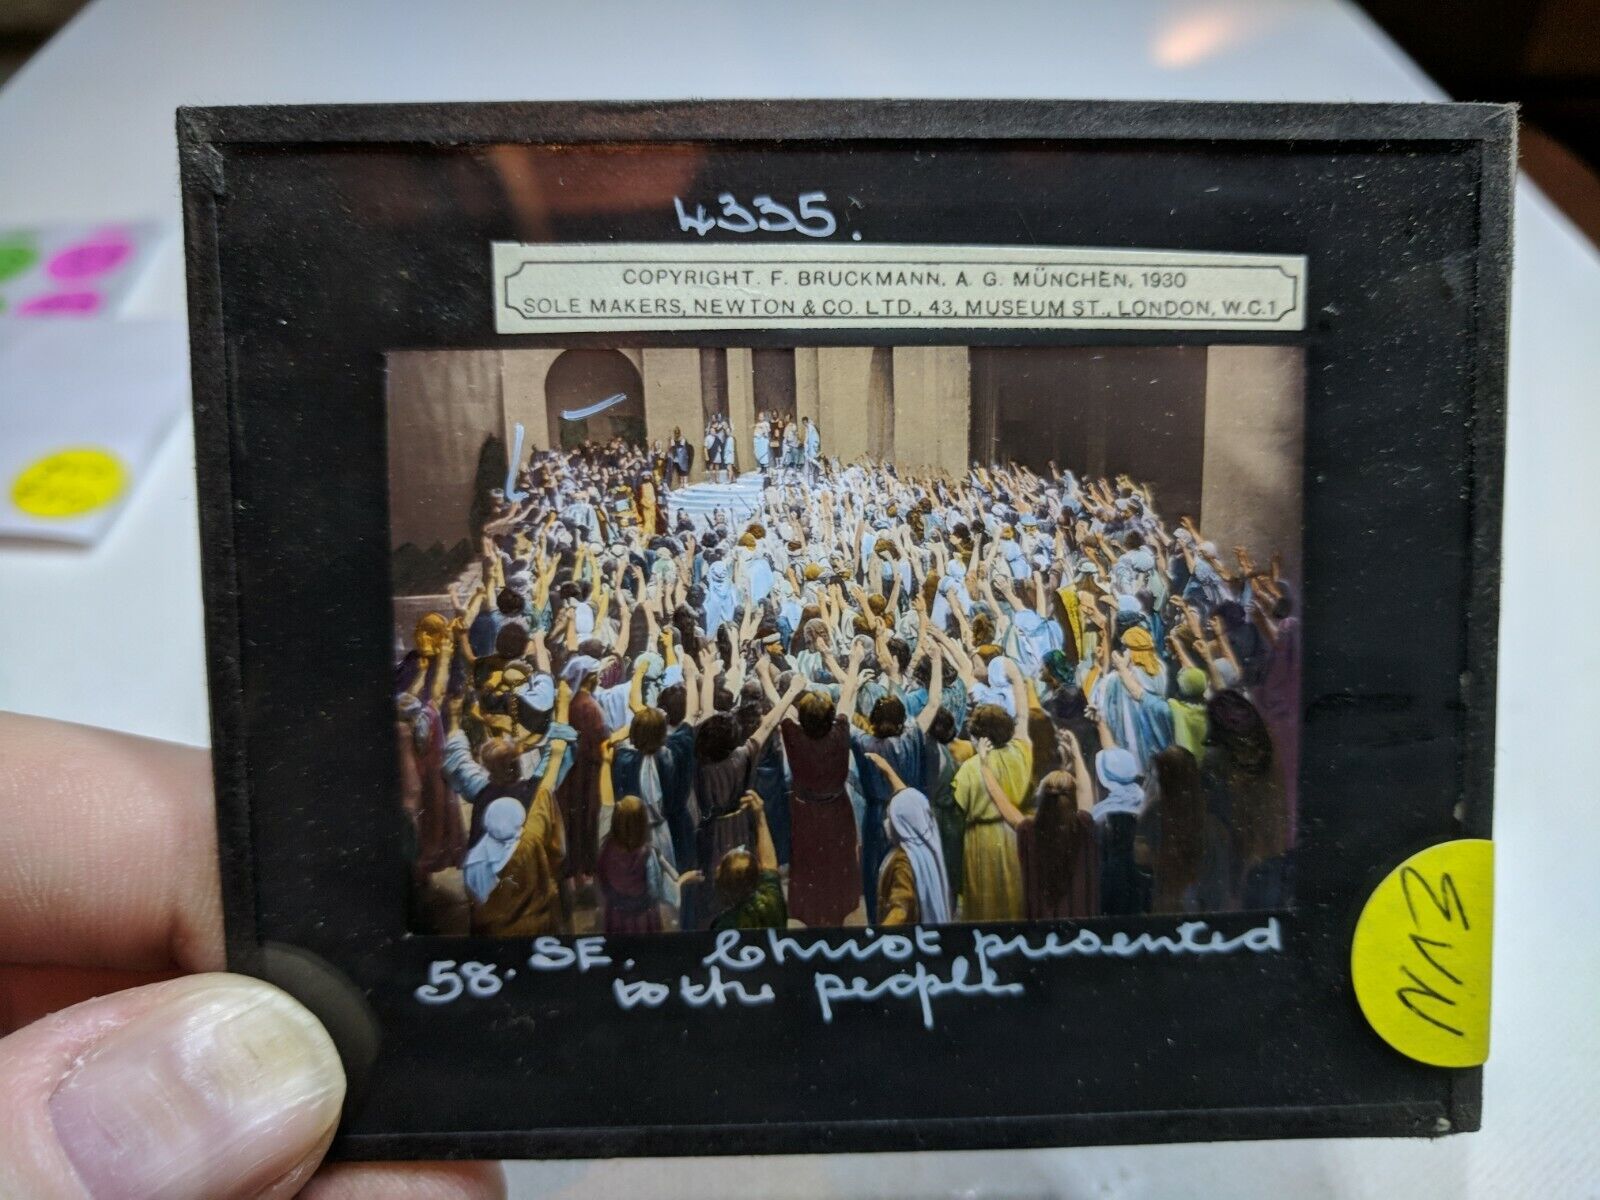 COLORED Glass Magic Lantern Slide EVN CHRIST PRESENTED TO THE PEOPLE AMAZING